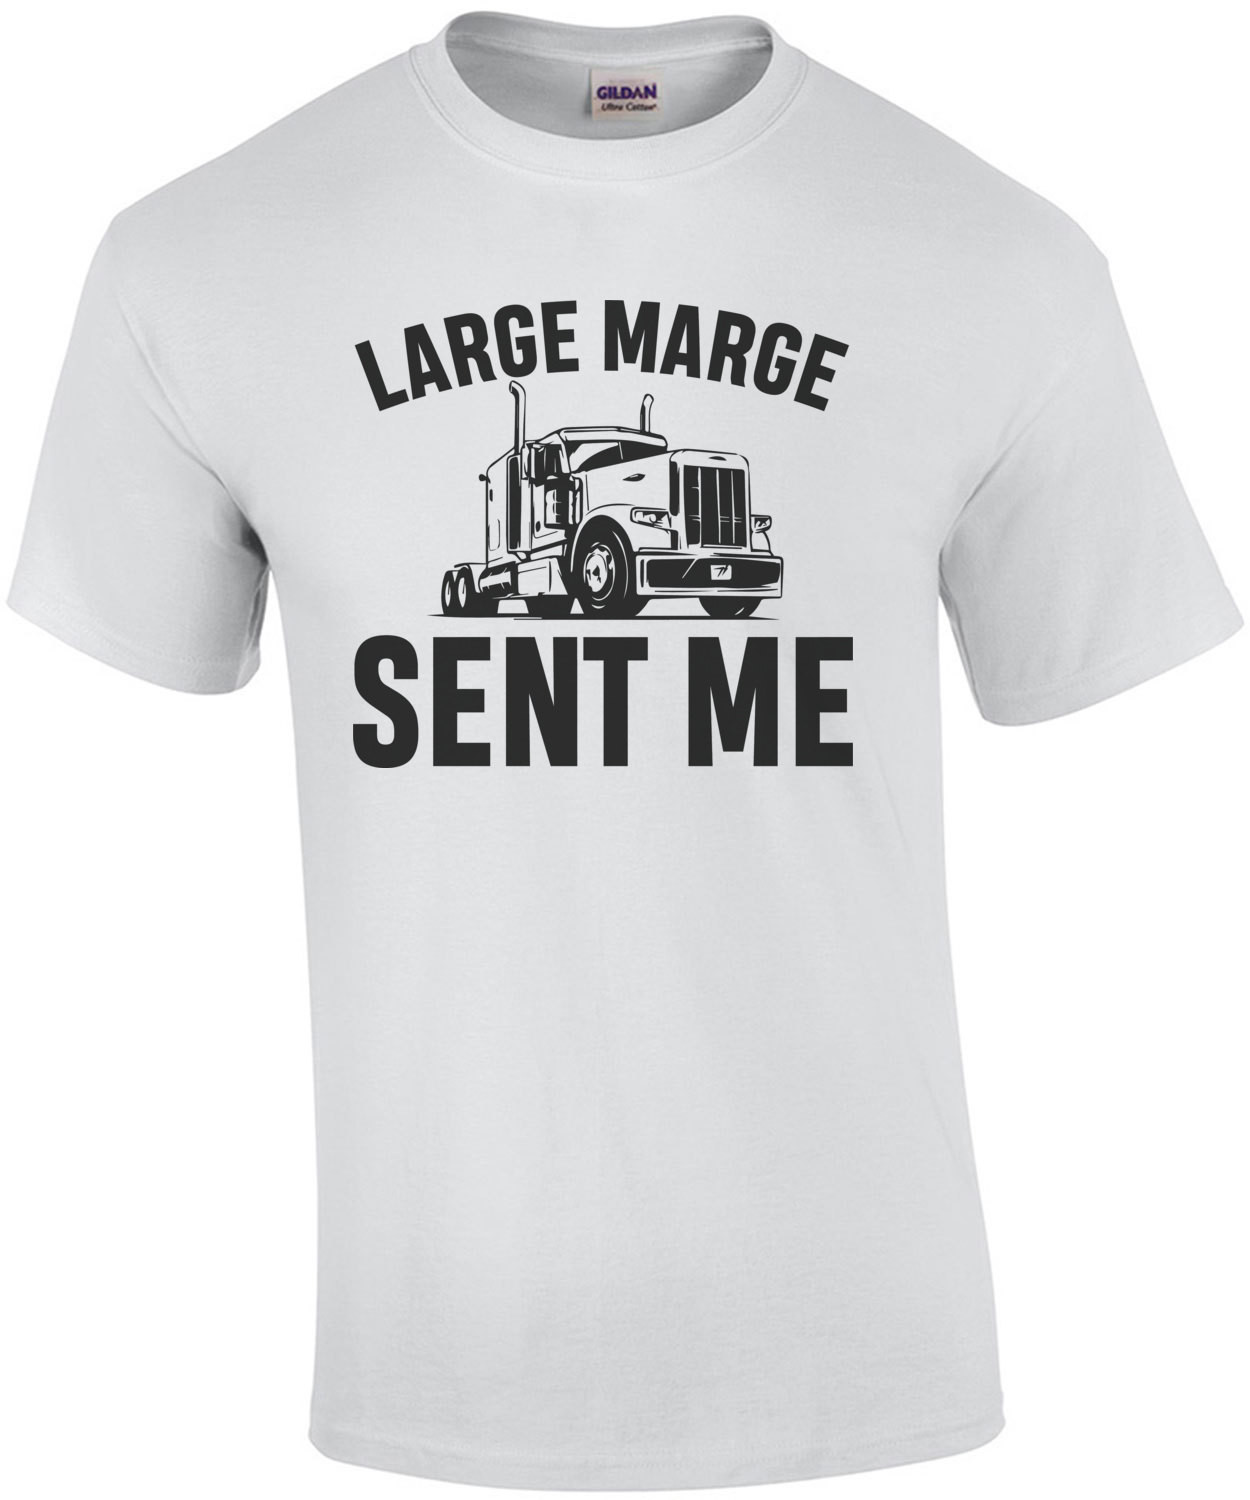 Large Marge Sent Me - Pee-wee's Big Adventure T-Shirt - 80's T-Shirt